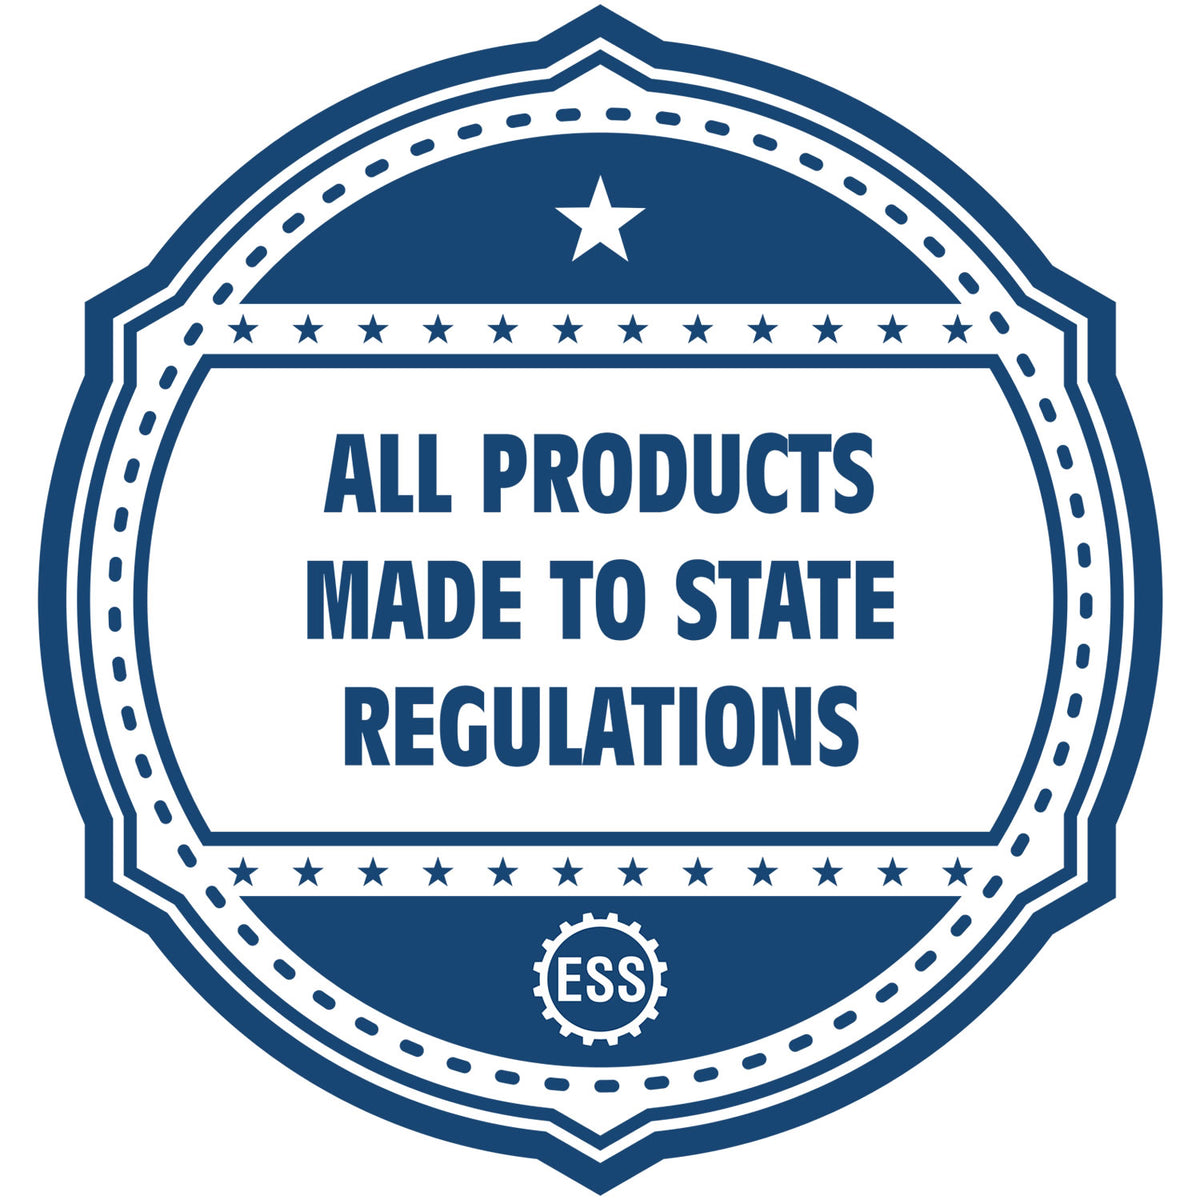 A blue icon or badge for the Slim Pre-Inked Michigan Professional Geologist Seal Stamp showing that this product is made in compliance with state regulations.